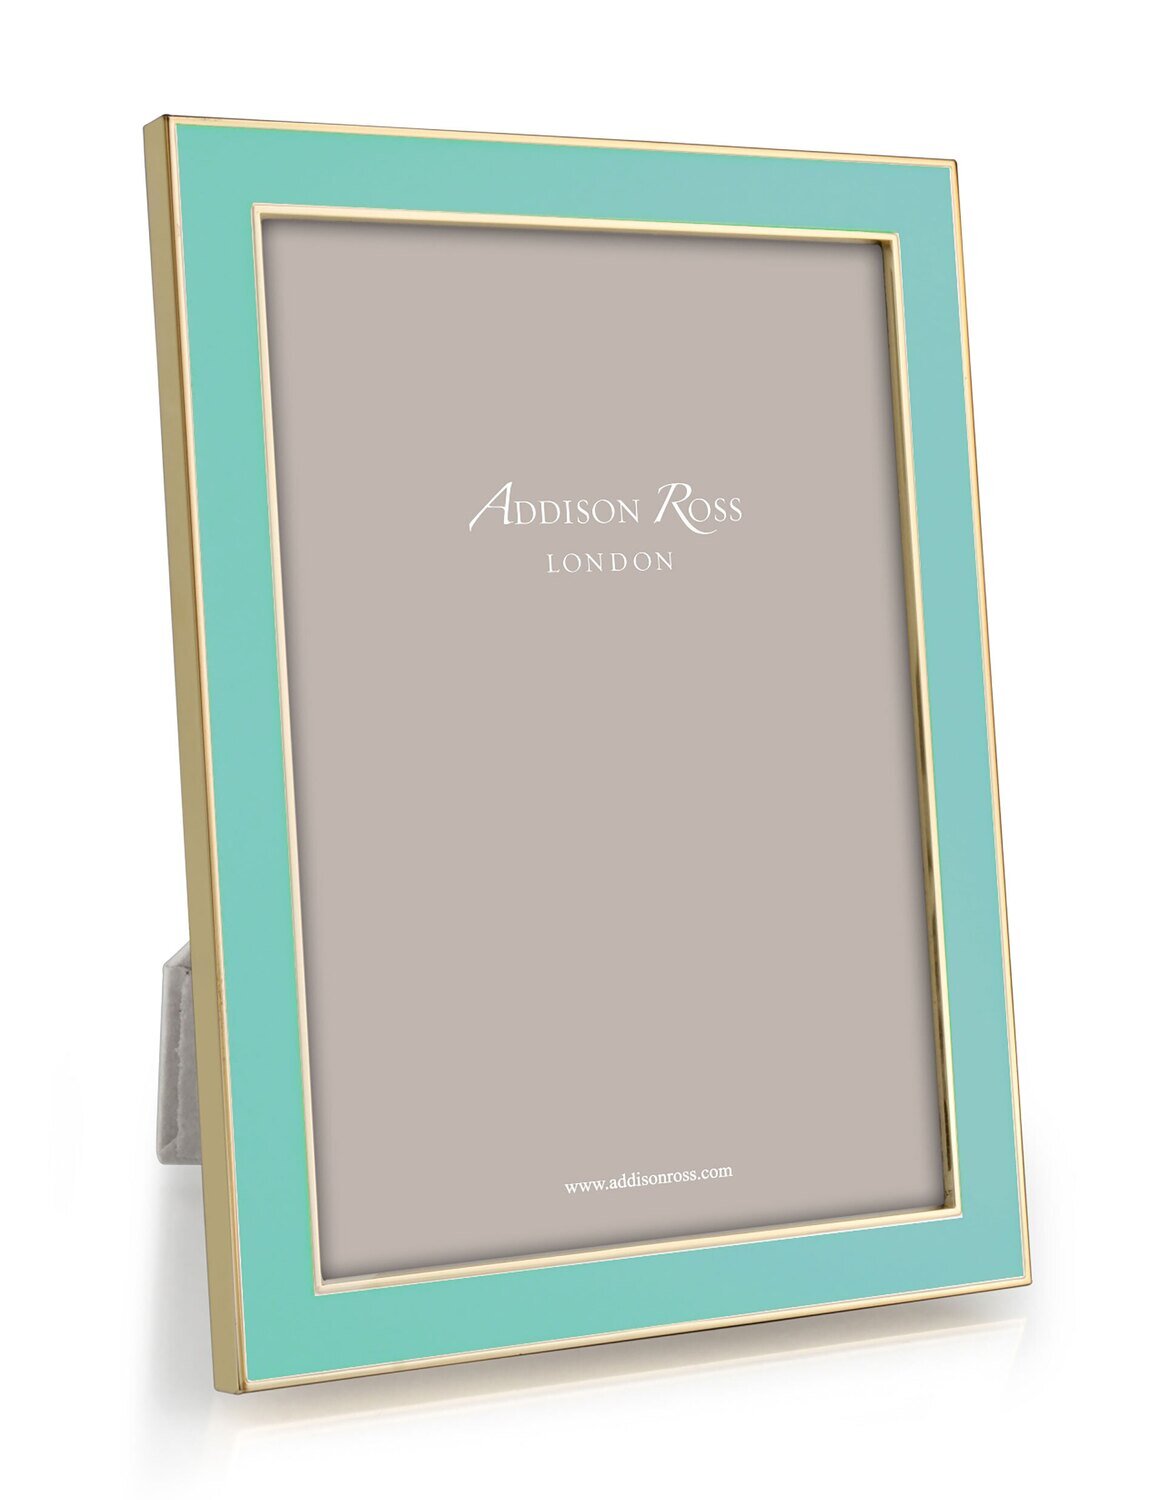 Addison Ross 8 x 10 Inch 15mm Pastel Blue & Gold Picture Frame e-Gold Plating FR1359